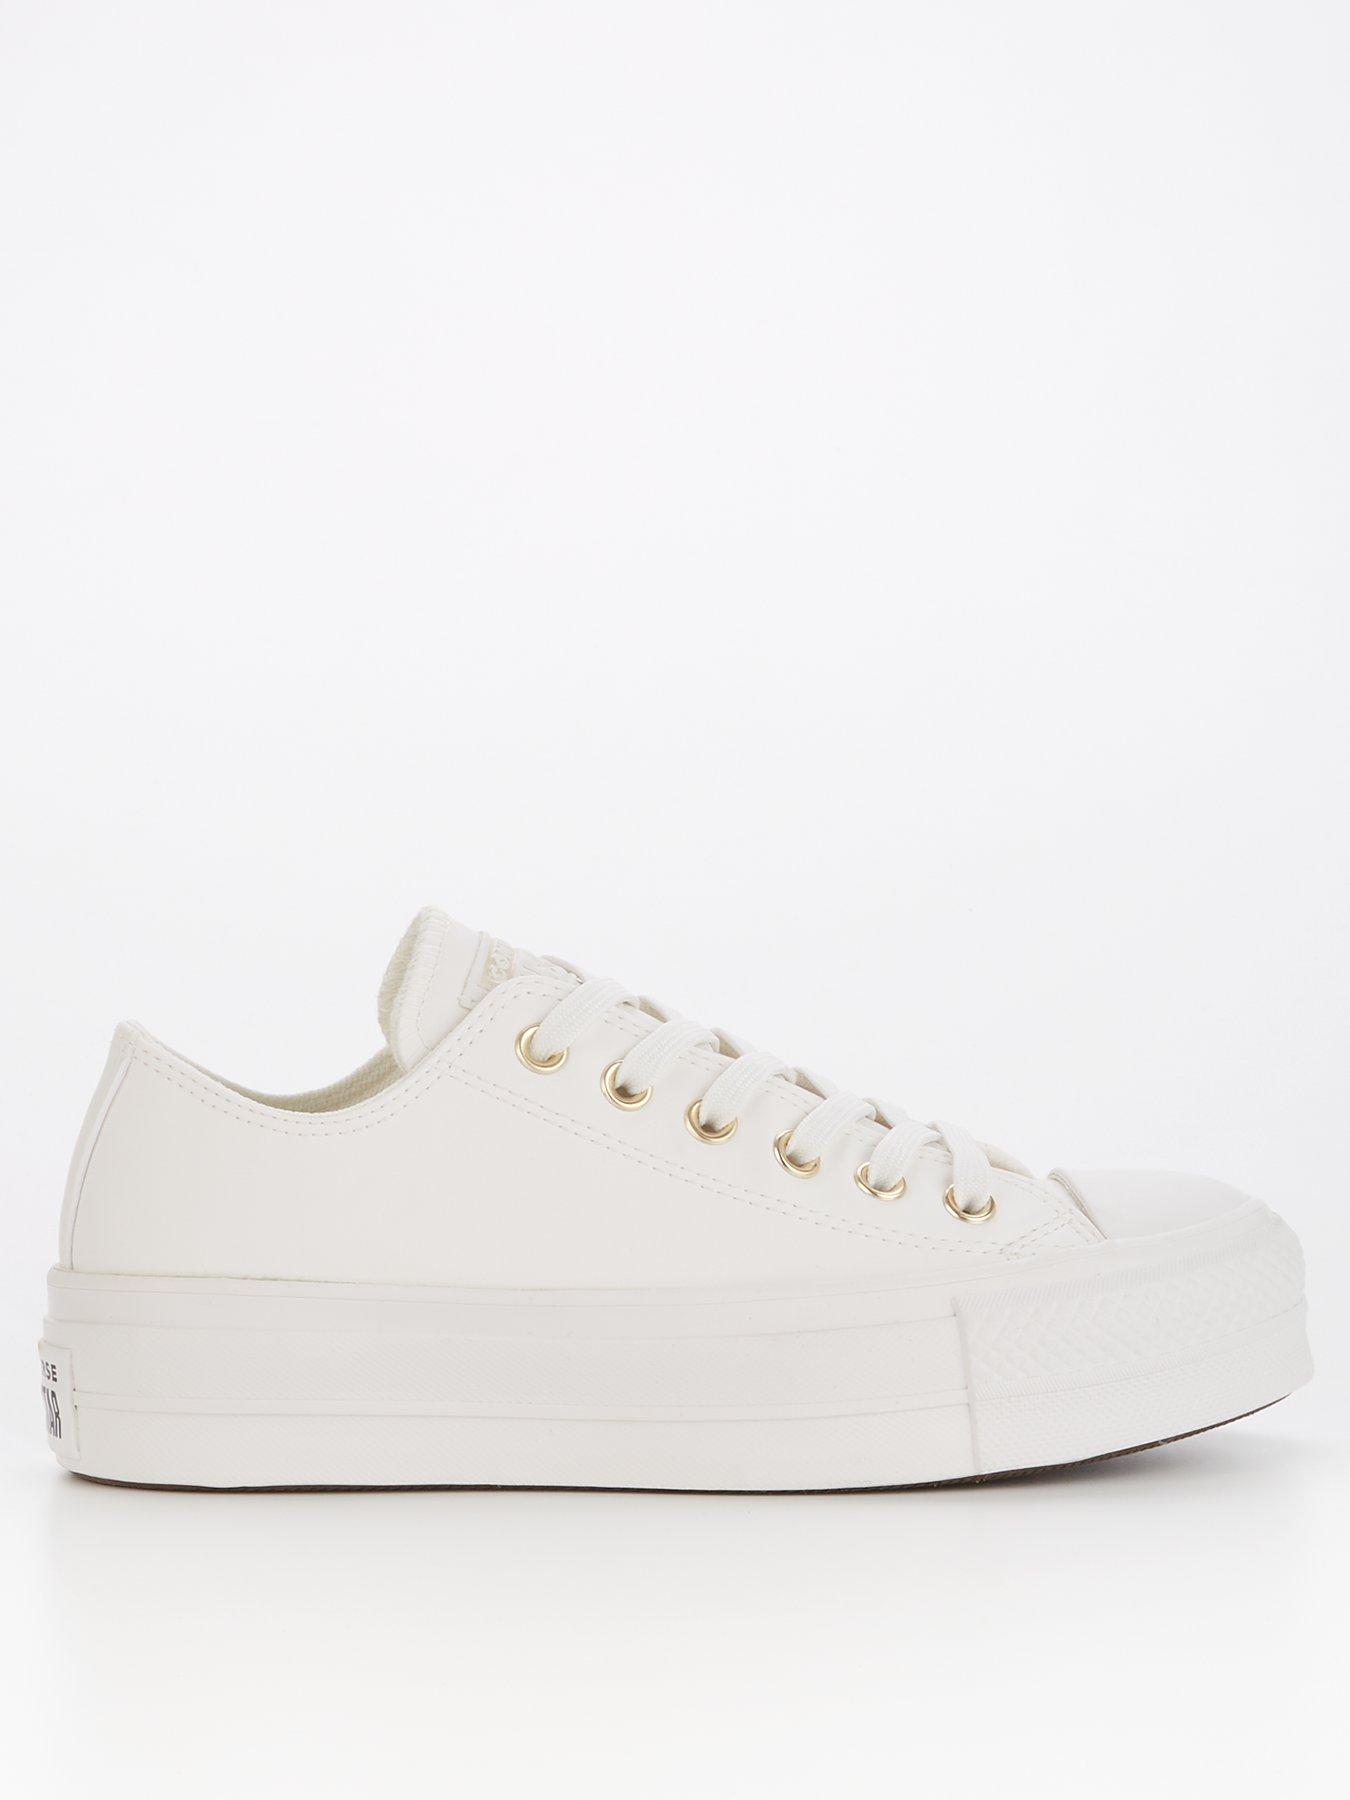 Converse Womens Lift Ox Trainers - Off White, White, Size 6, Women